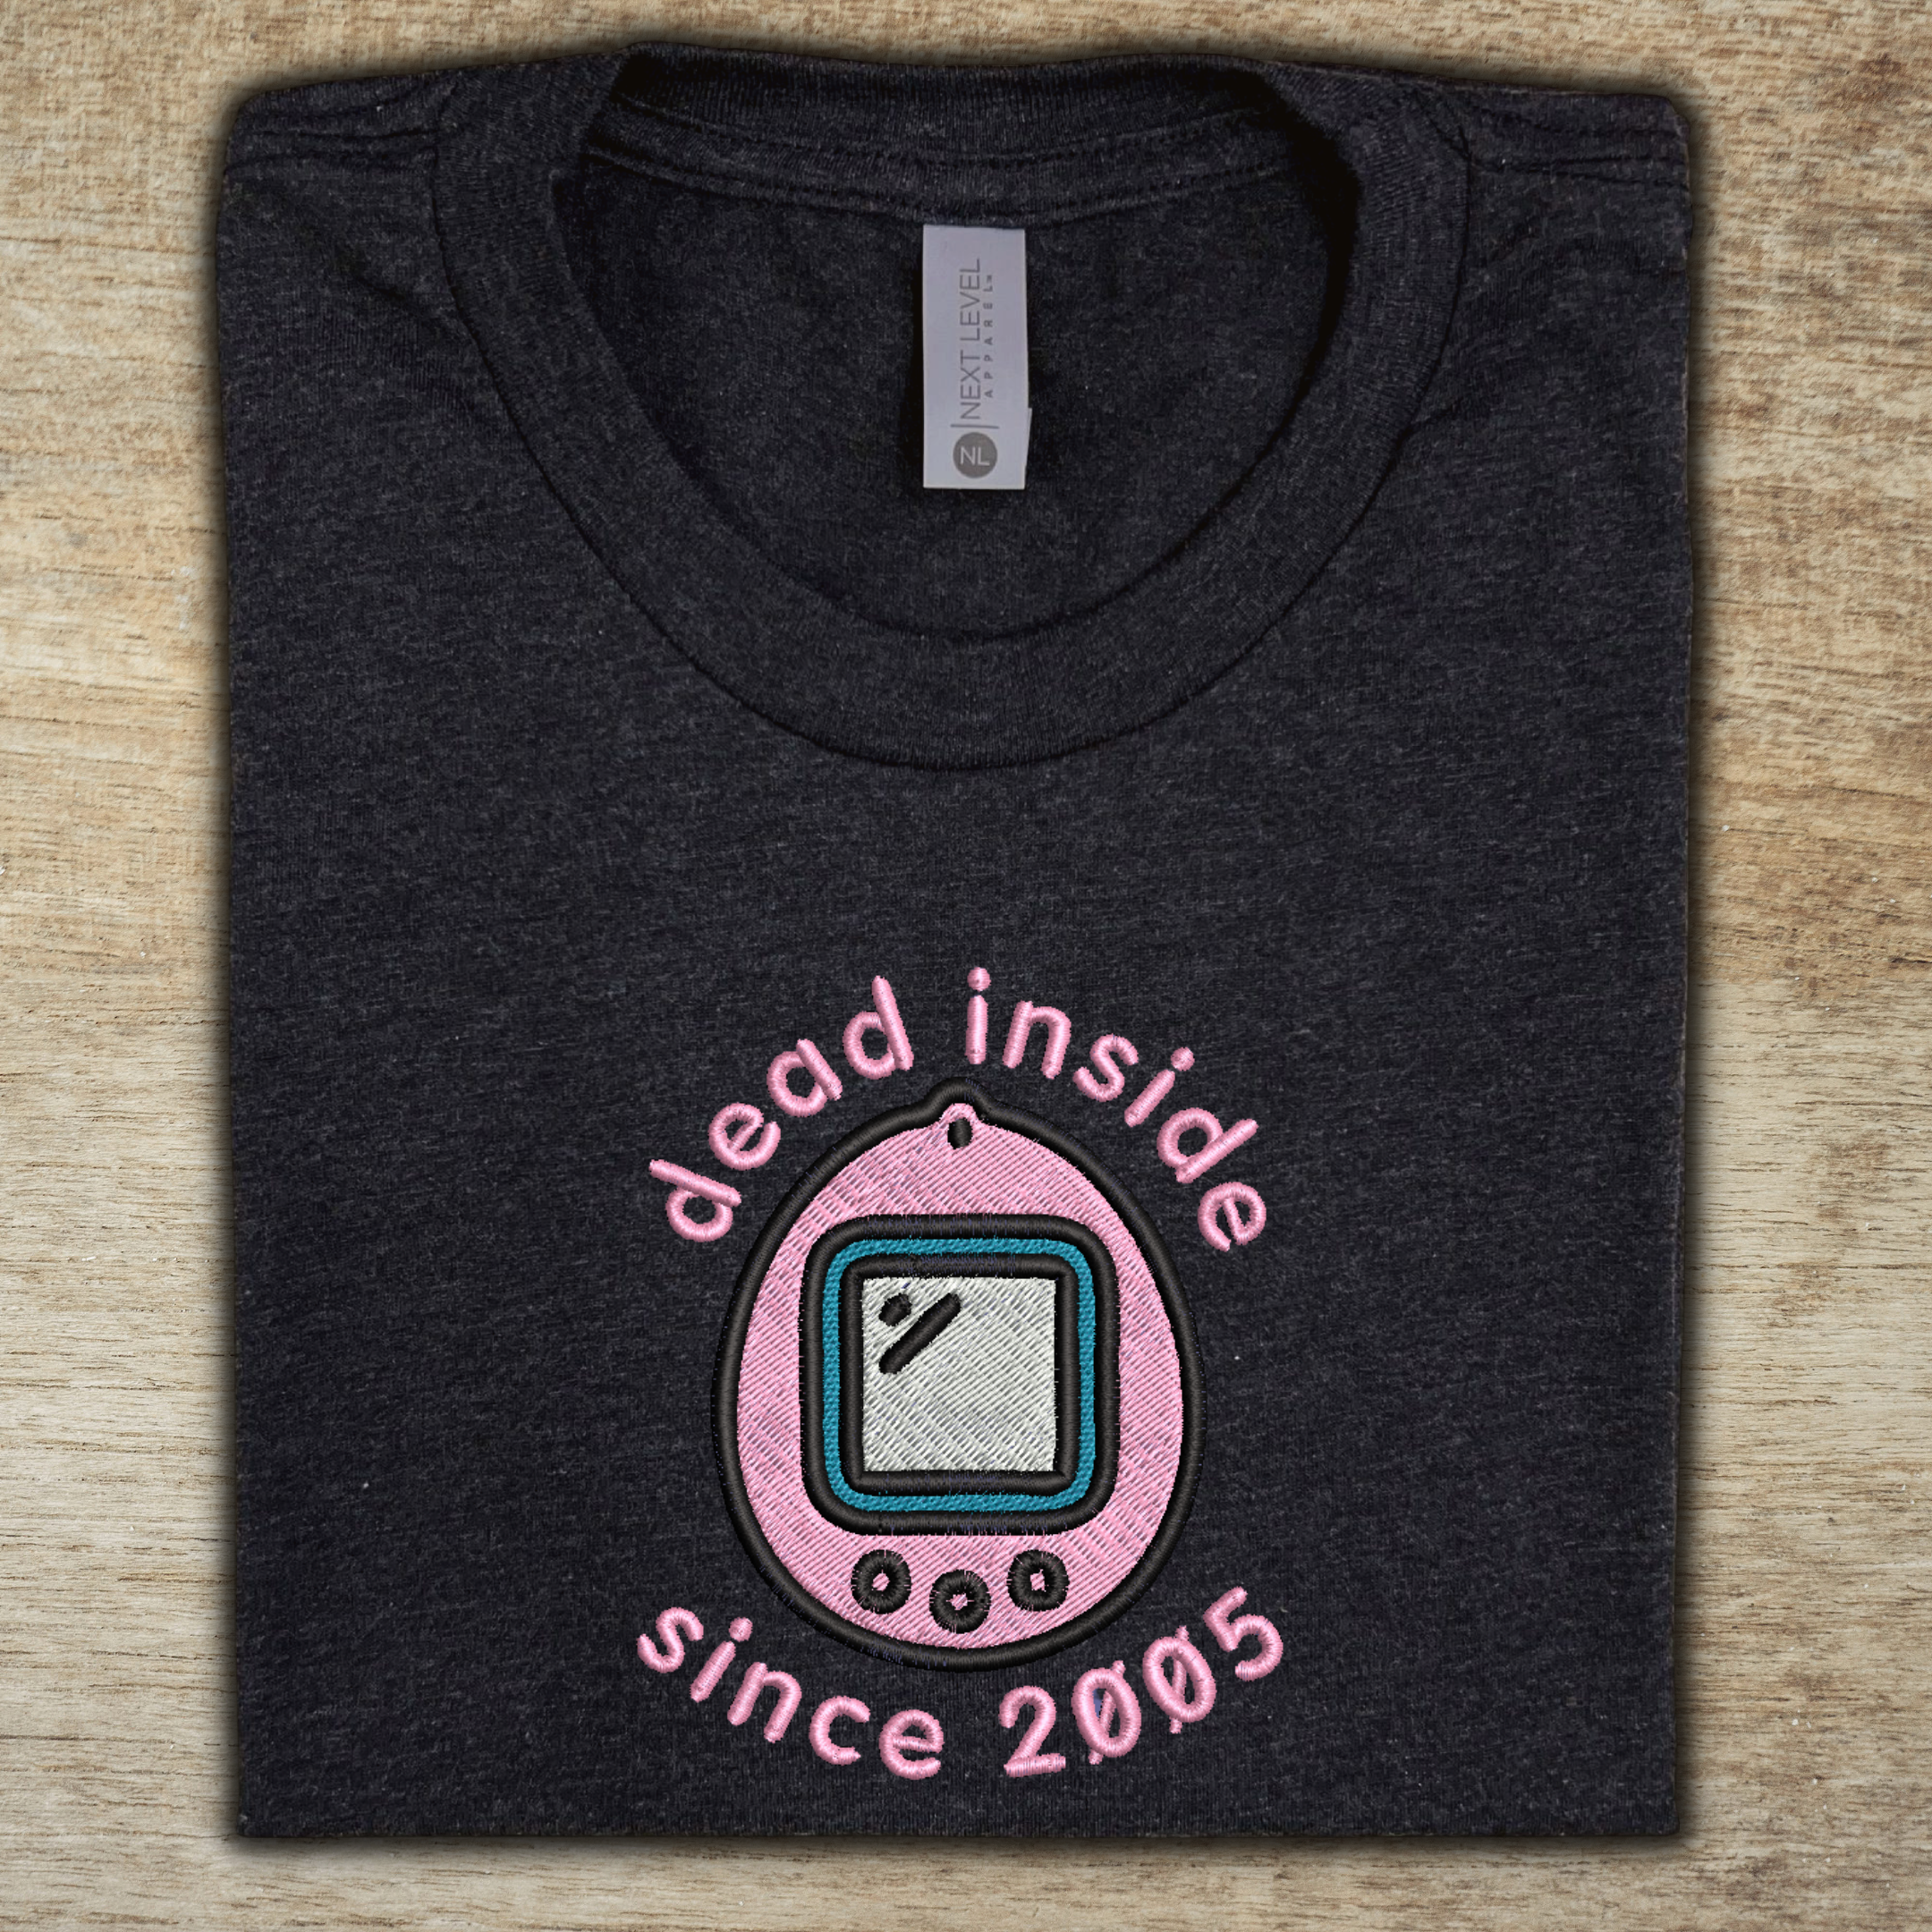 Tamagotchi "Dead Inside Since 2005" Unisex One Size Fits All Machine Embroidered t-shirt